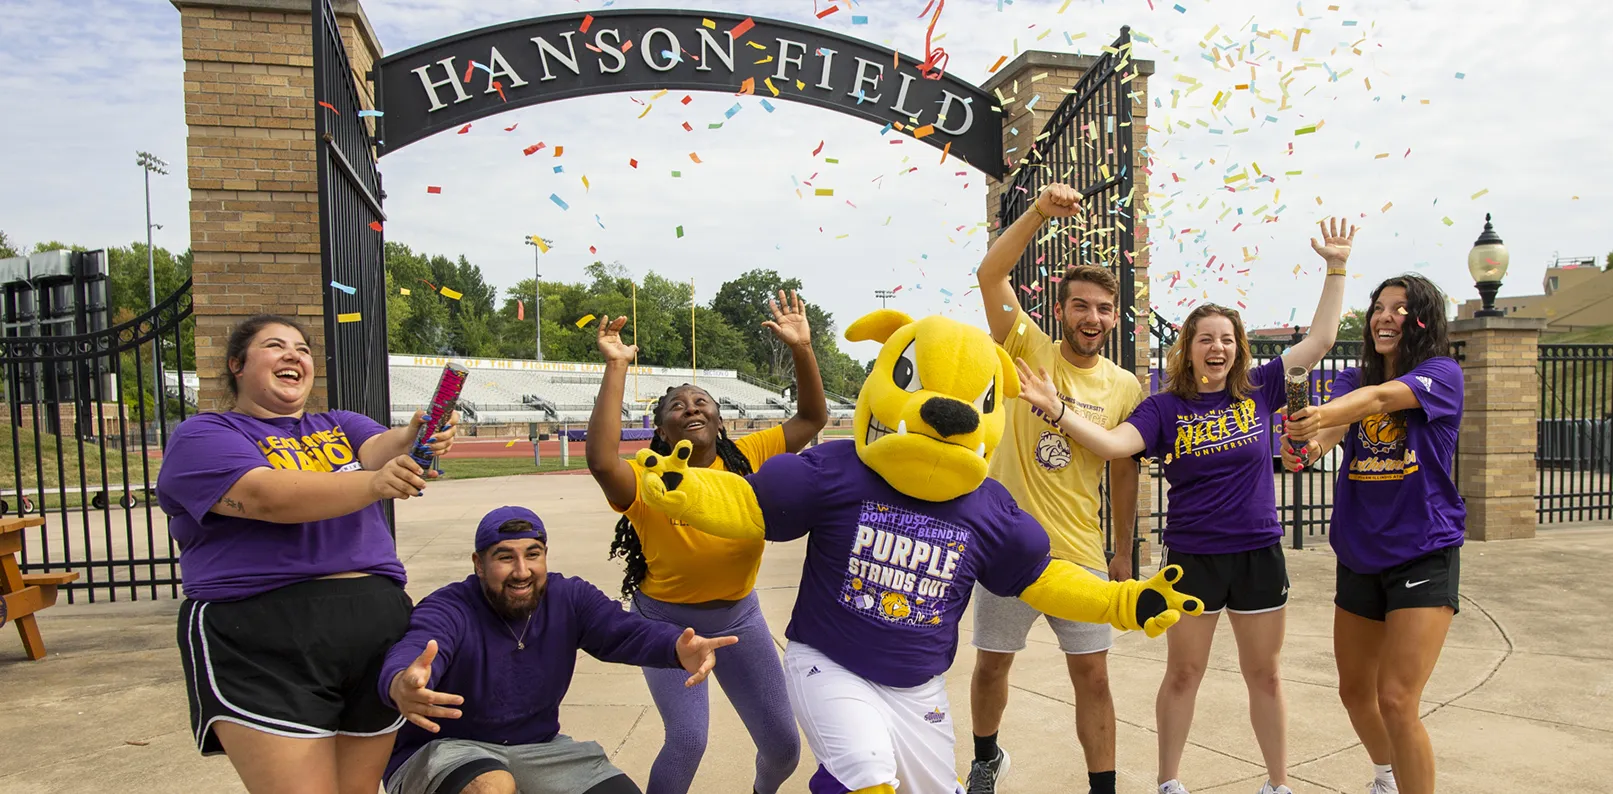 Group of students celebrating with Rocky (costumed mascot) in front of Hanson Field gateway entrance